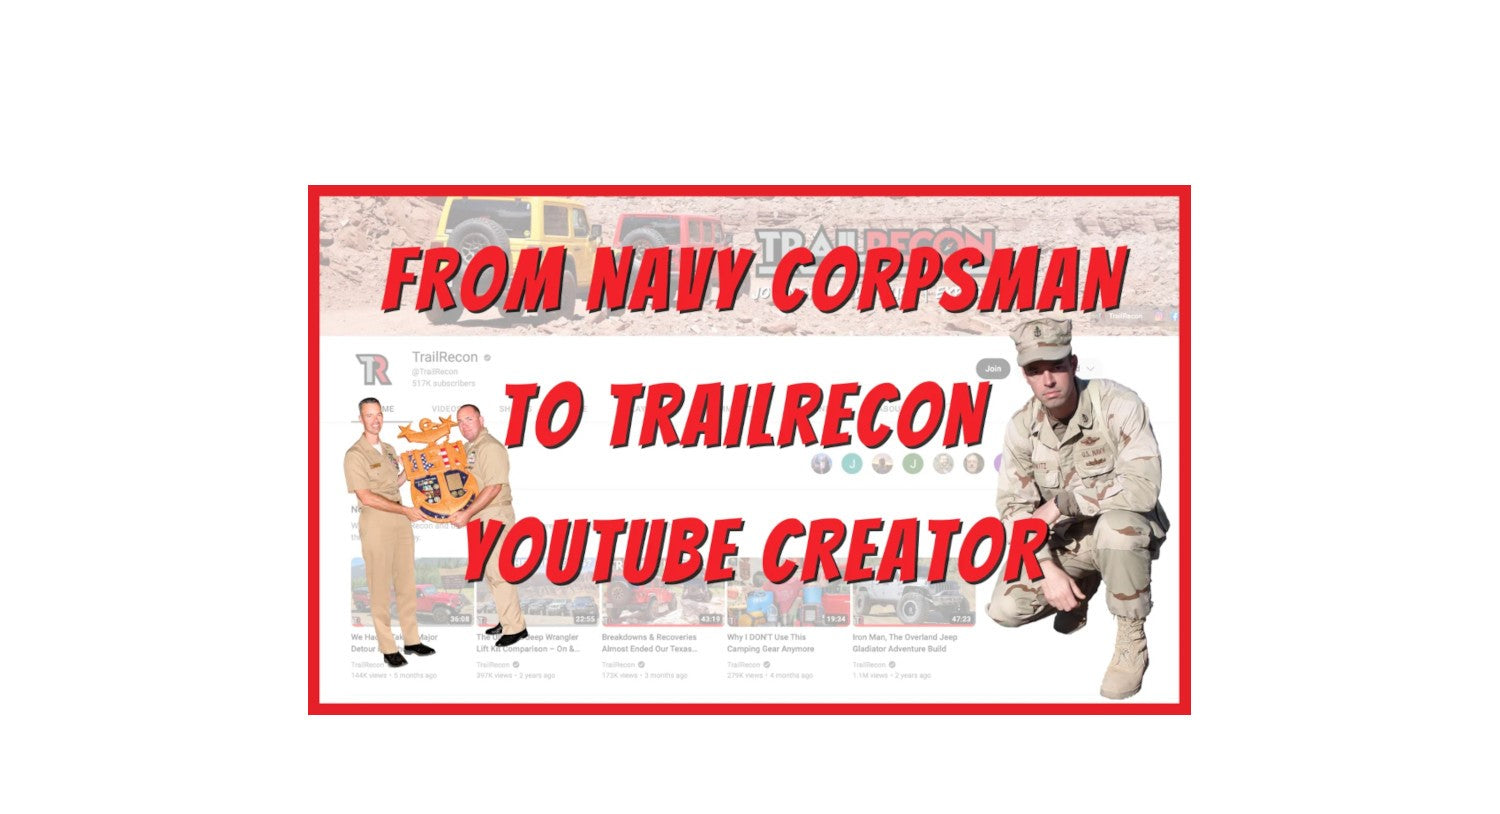 From Navy Corpsman to TrailRecon YouTube Creator